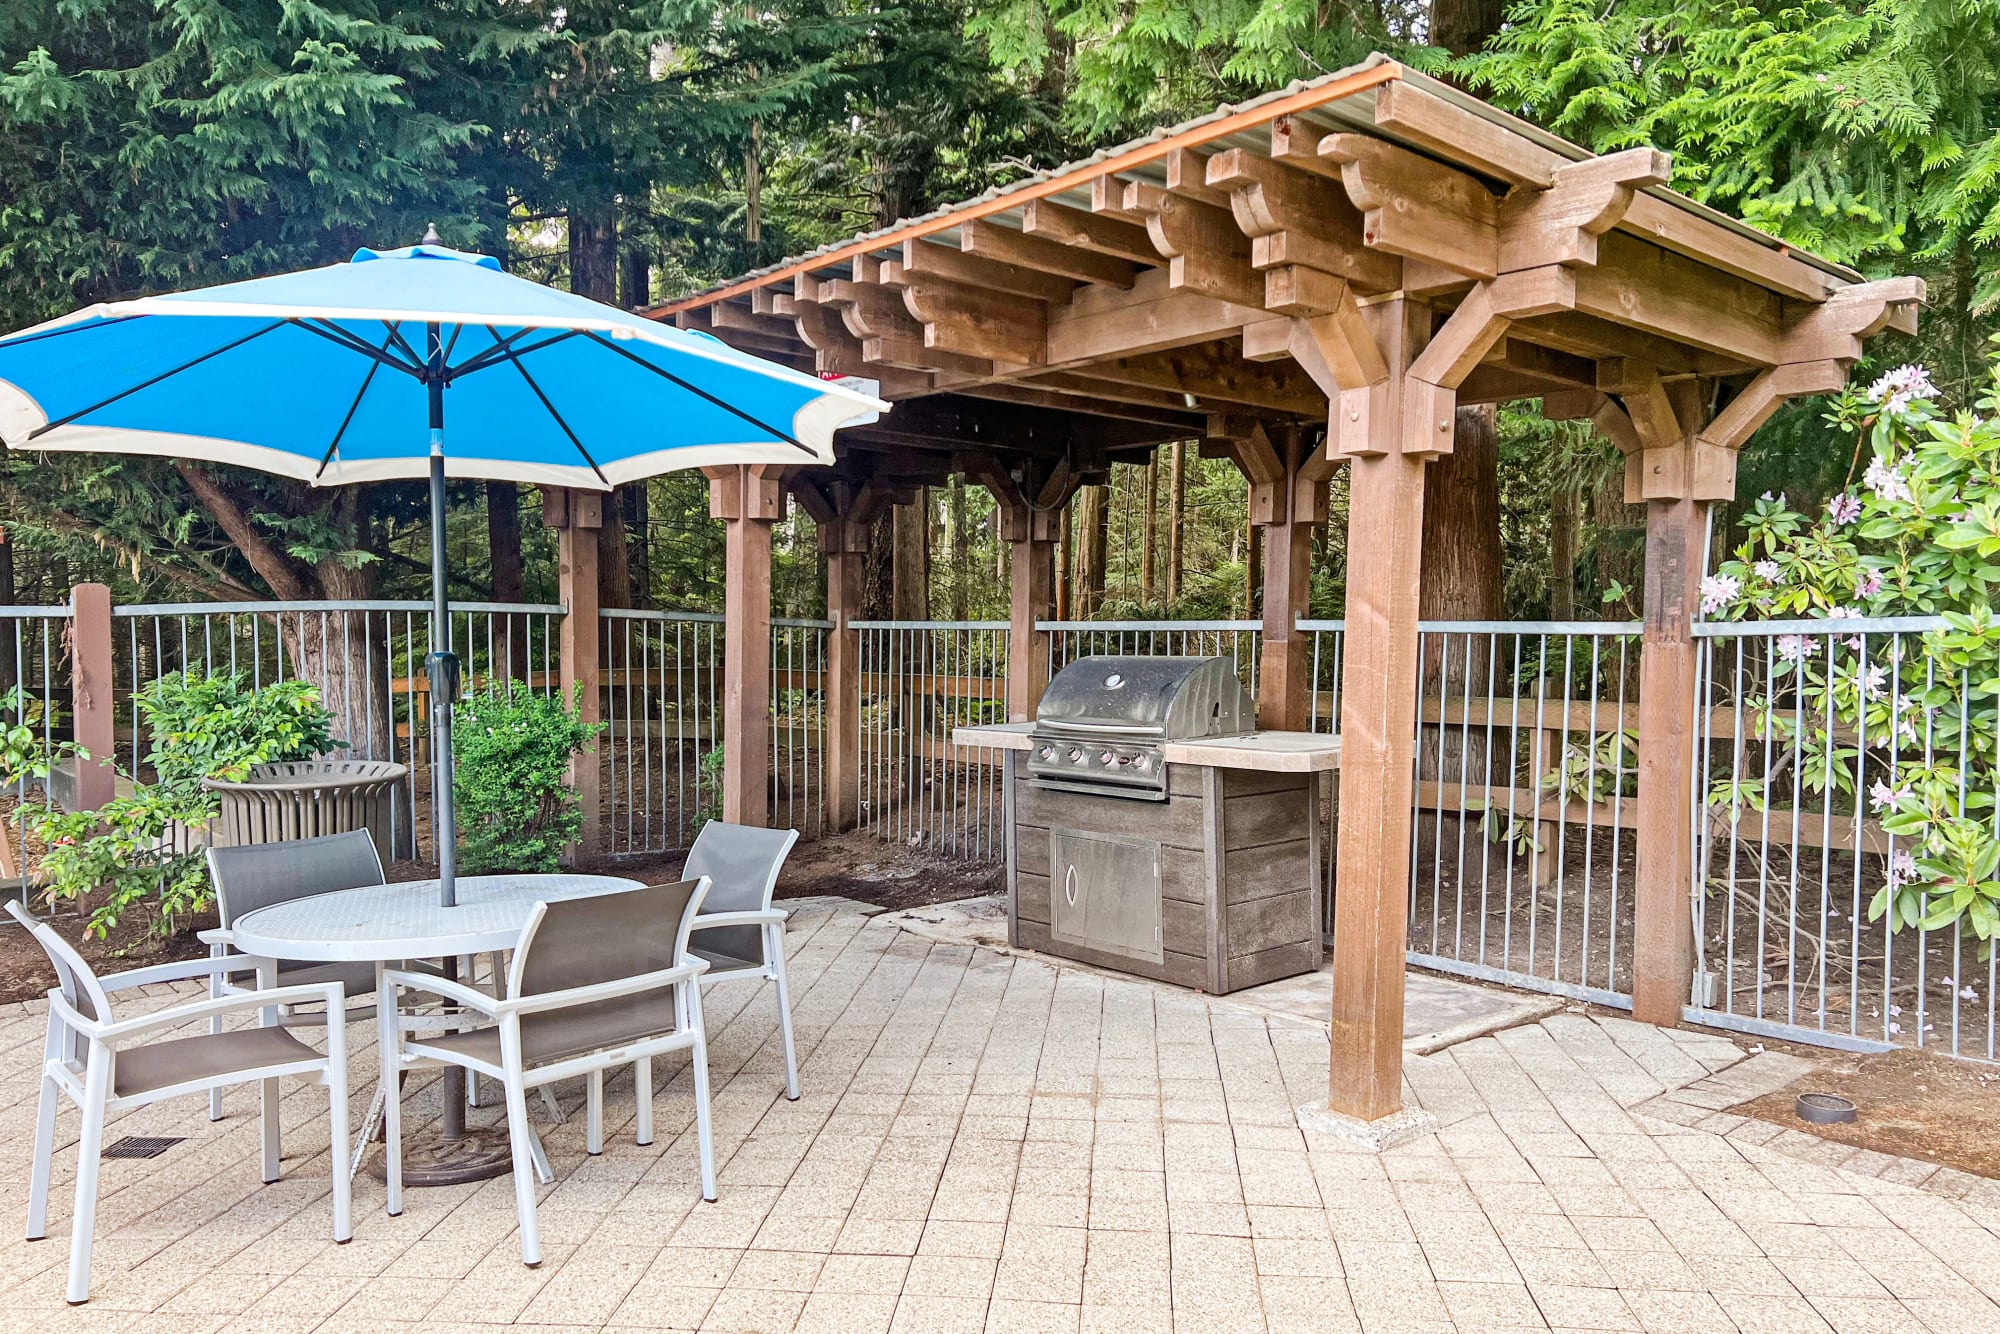 The covered community BBQ area at Wildreed Apartments in Everett, Washington